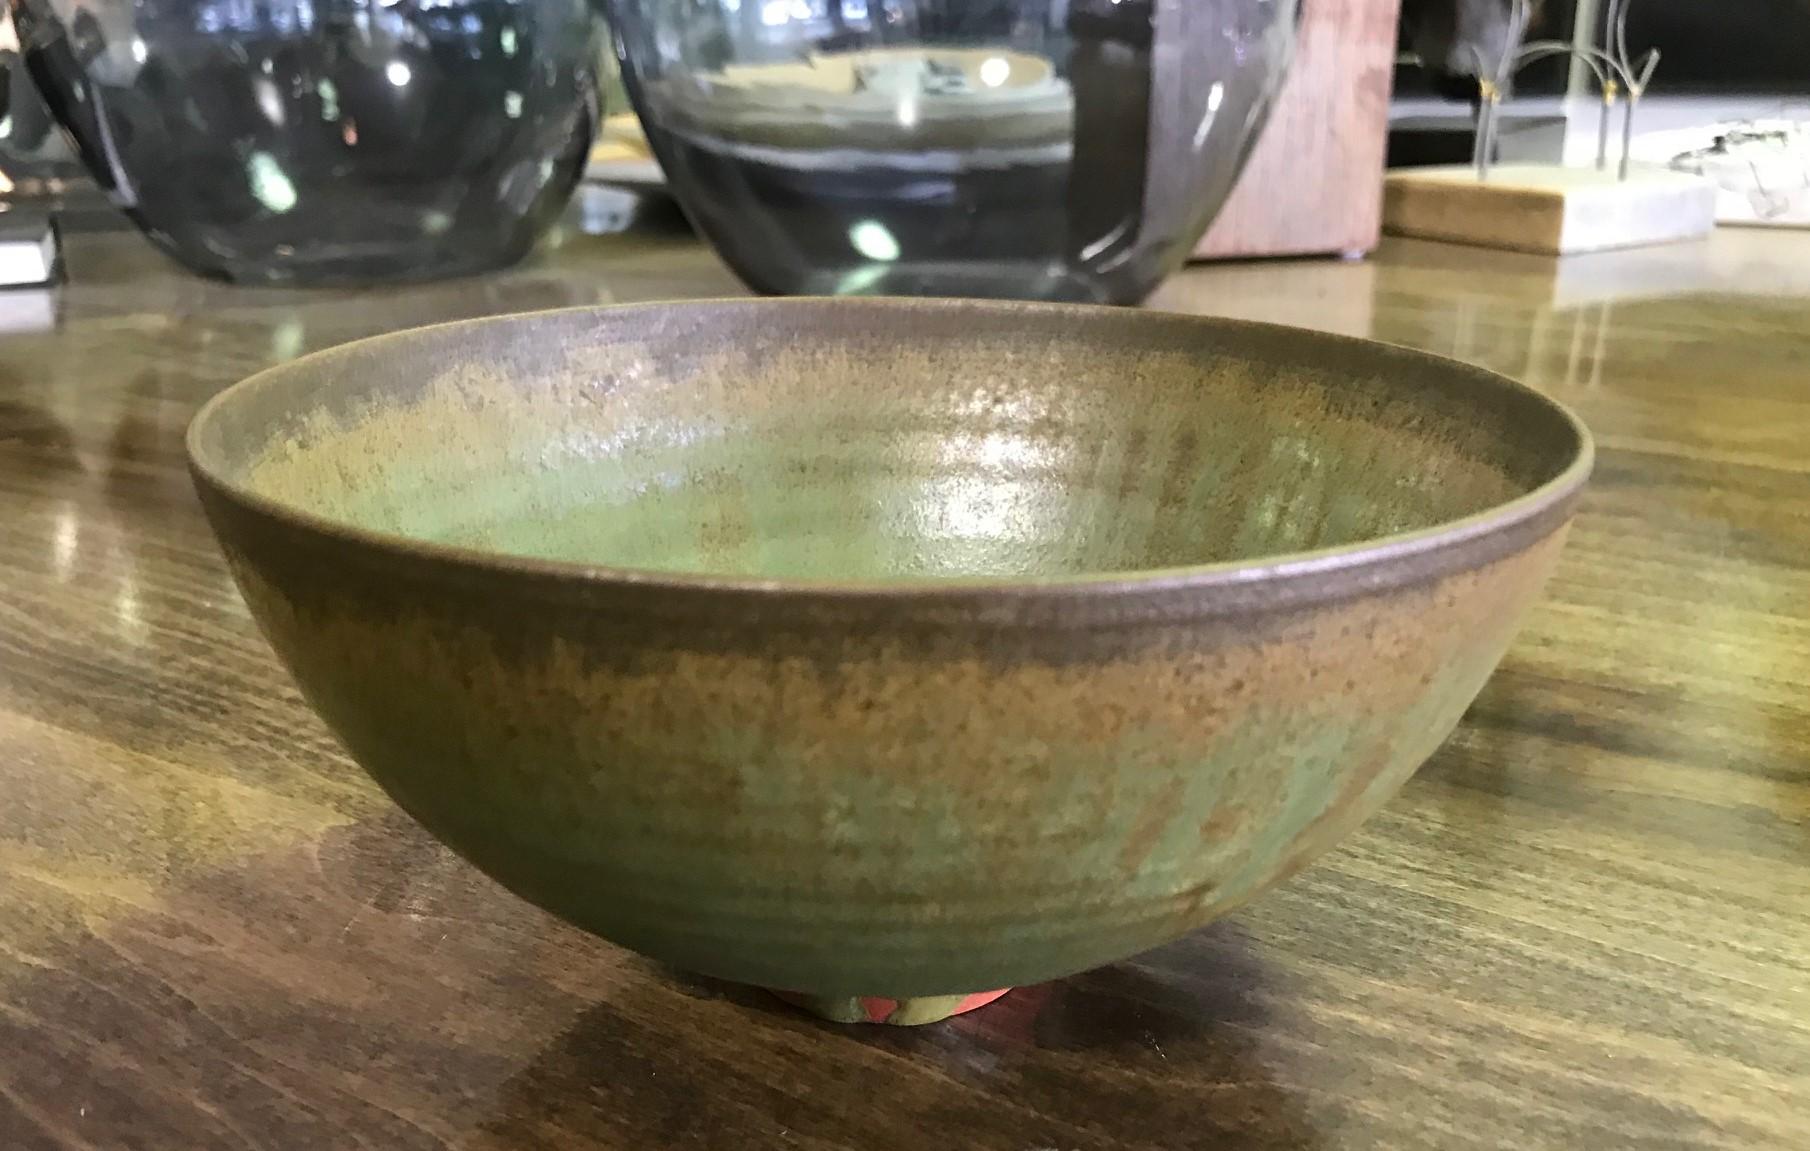 A masterful work by famed potters Otto and Gertrud Natzler. This round-shaped footed bowl was wheel thrown and formed by Gertrud and glazed by Otto with a rare dripped green lava glaze. The bowl captures your attention from all angles. You won't